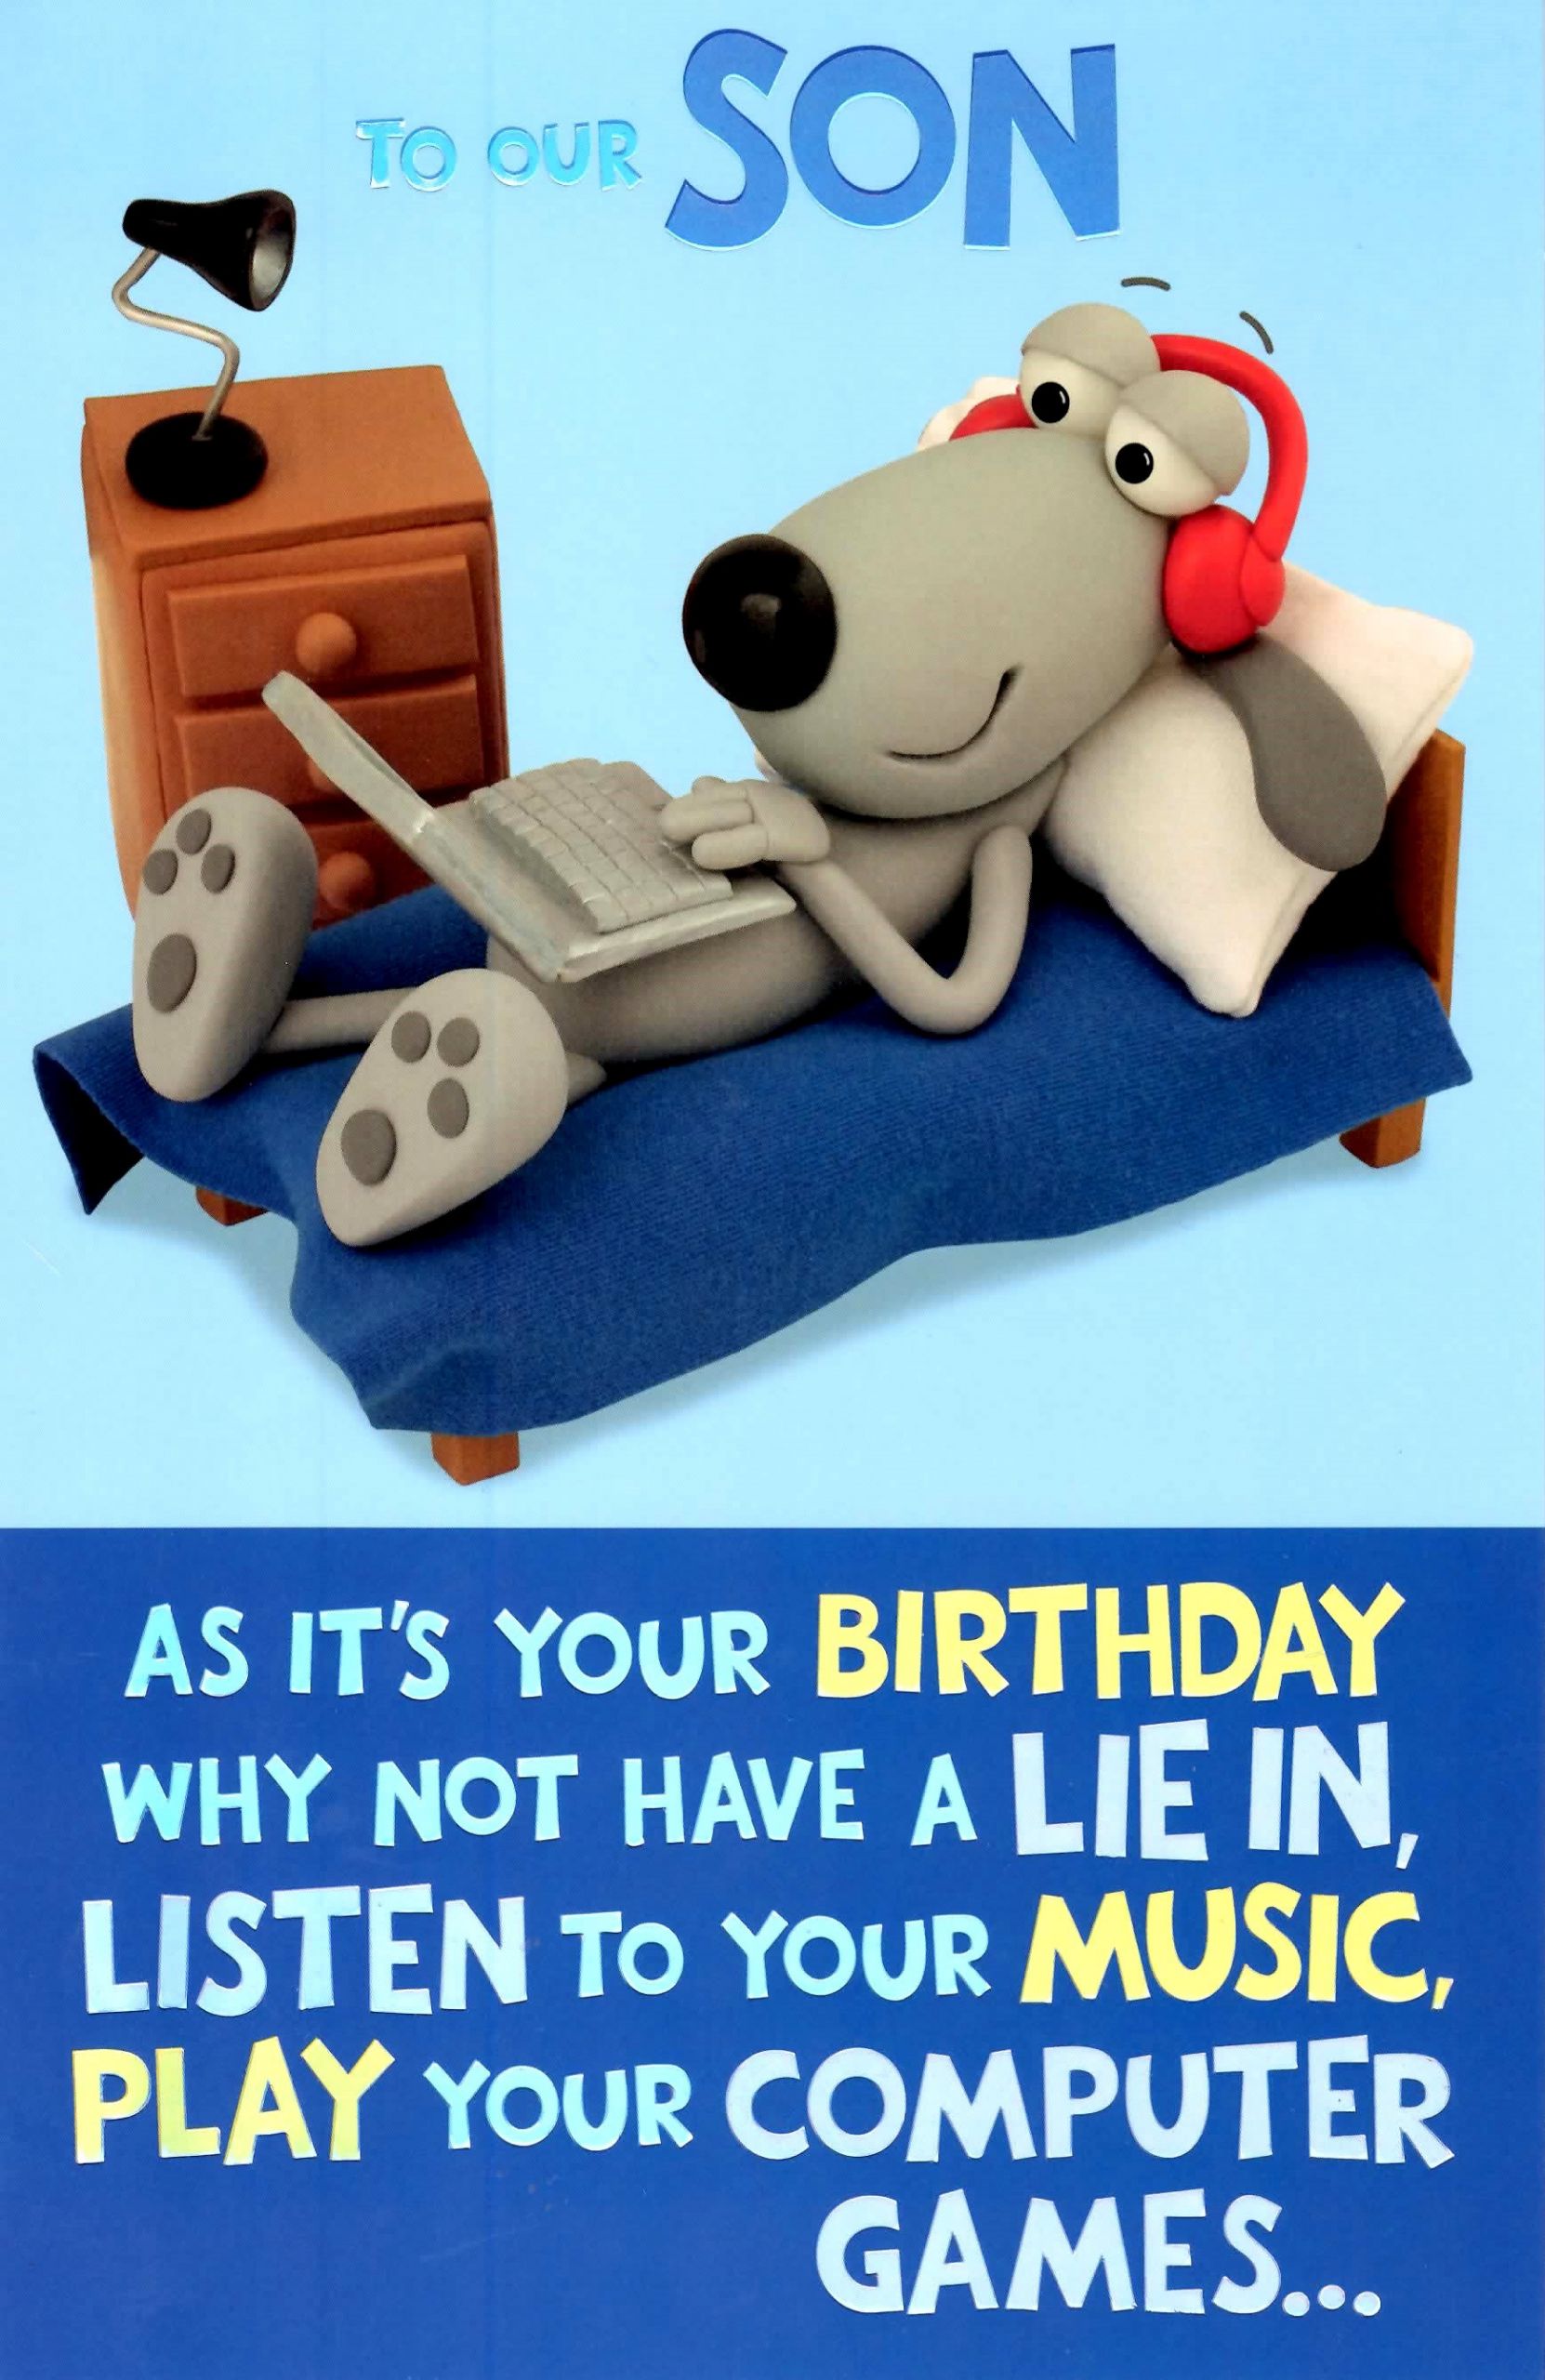 Funny Birthday Wishes For Son
 Cute Funny To Our Son Birthday Greeting Card Crackers